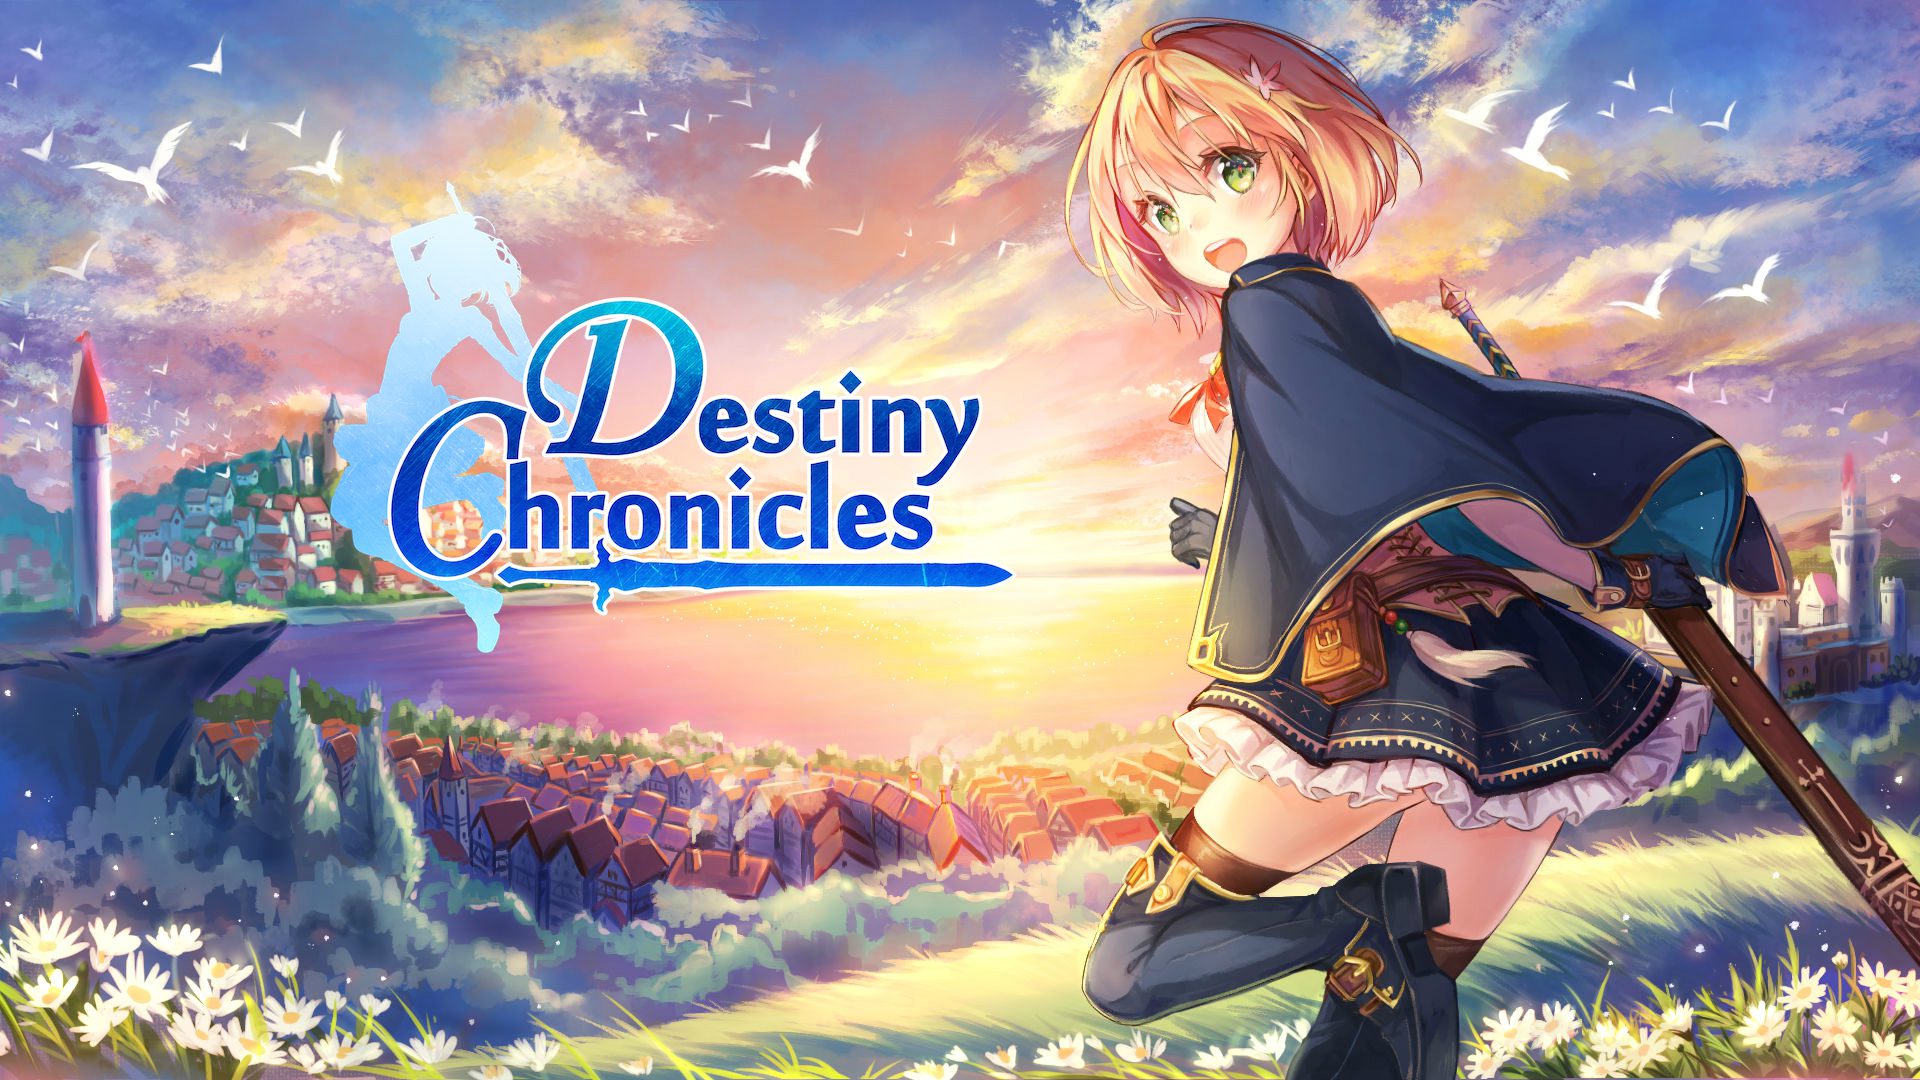 Fantasy action JRPG Destiny Chronicles launches on Kickstarter this week